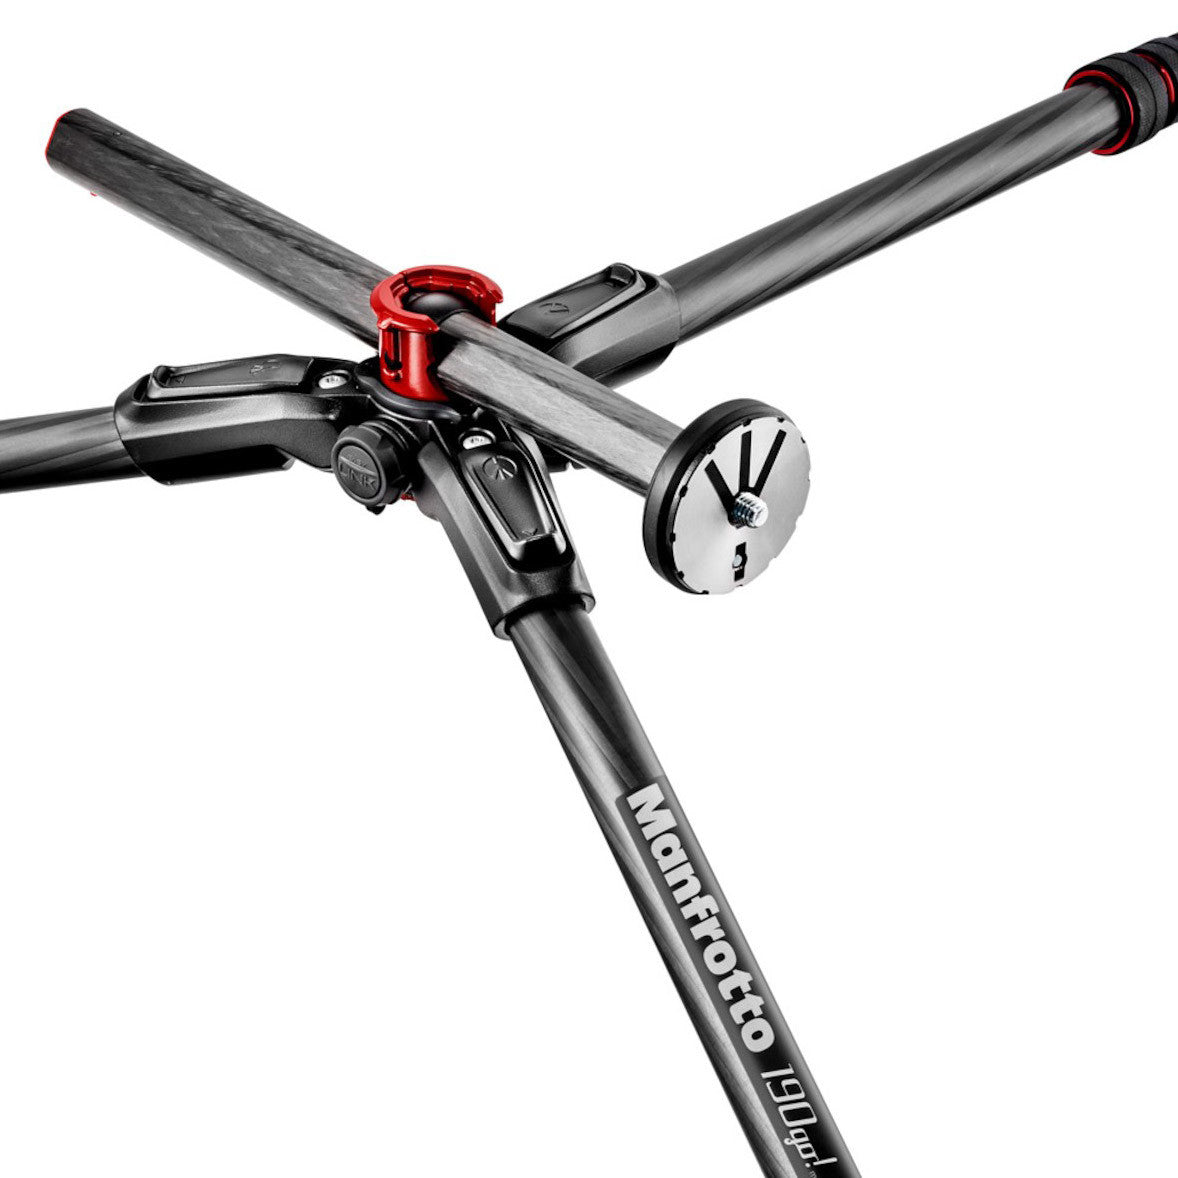 Manfrotto 190go! Carbon Fiber 4 Section Tripod with 3 Way Head